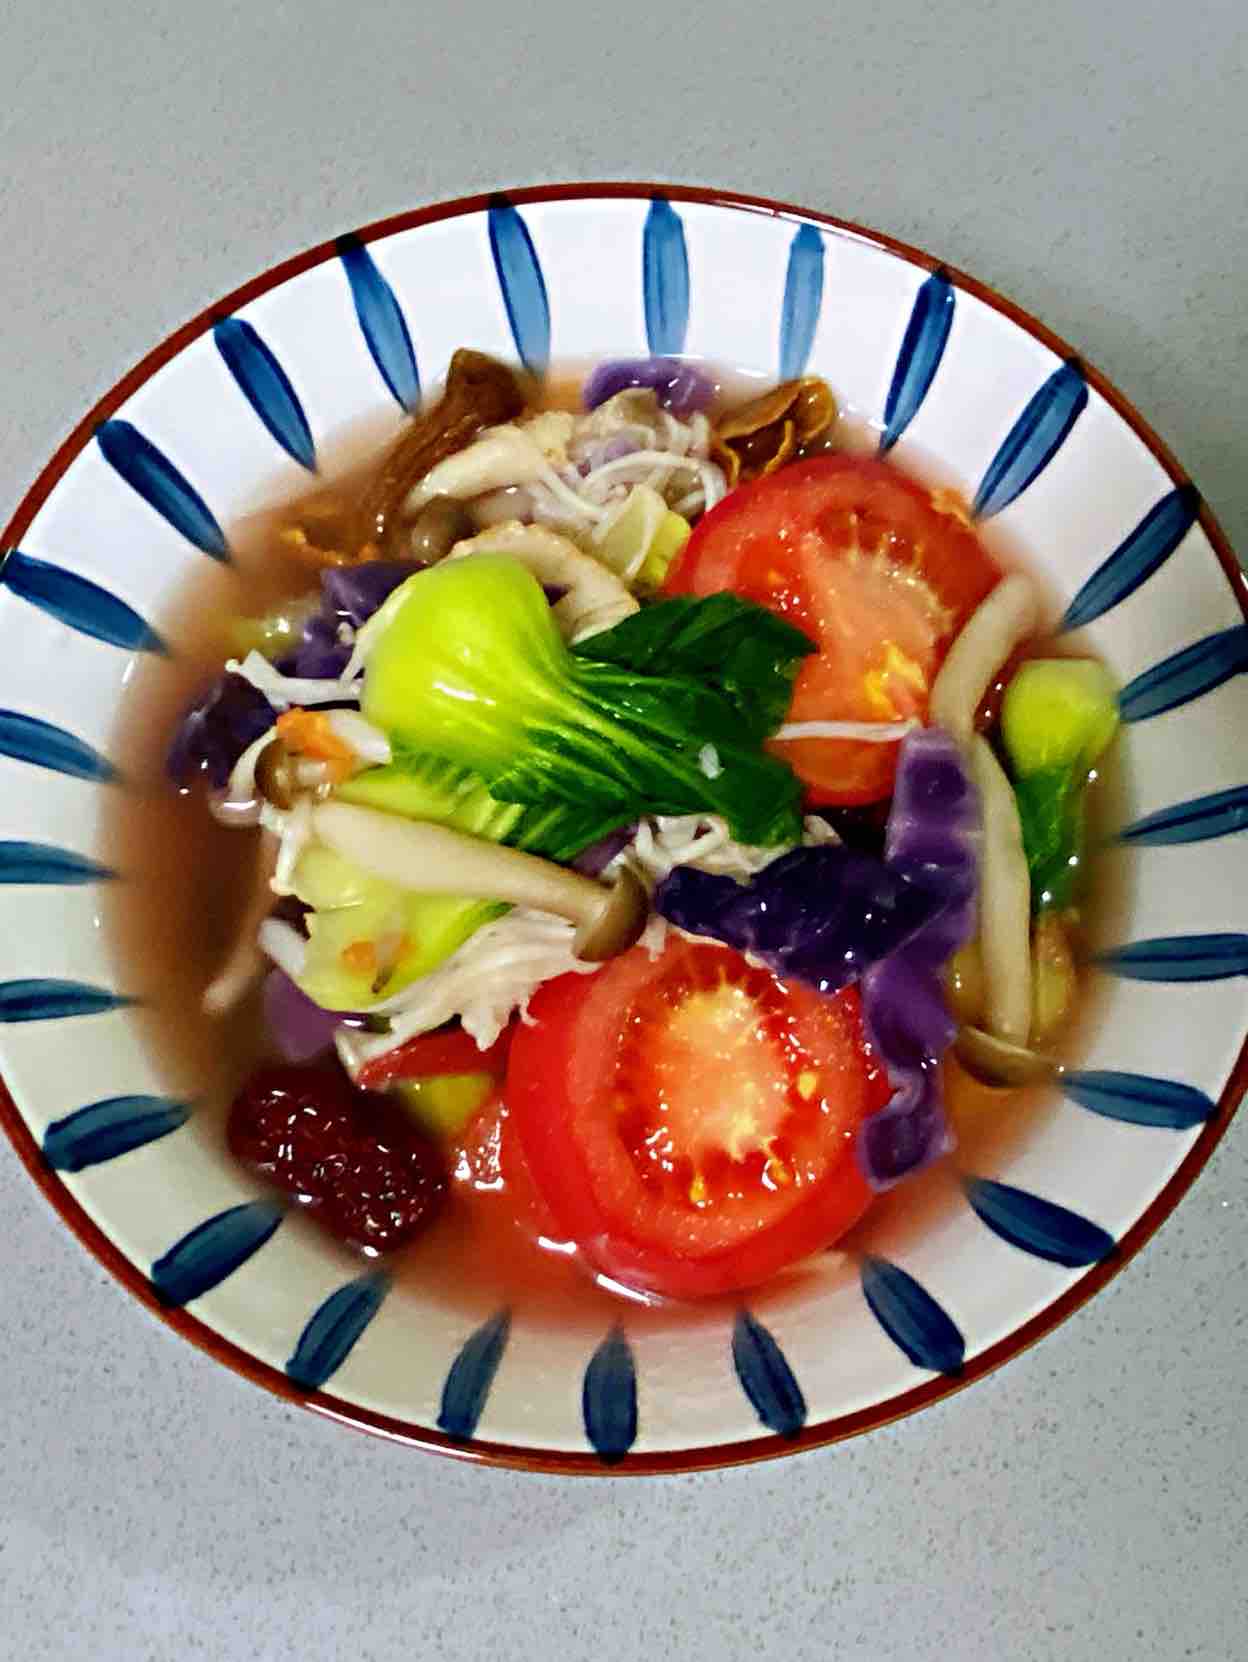 [recipe for Pregnant Women] Colorful Mushroom Soup, Delicious, Low-fat and Nutritious recipe